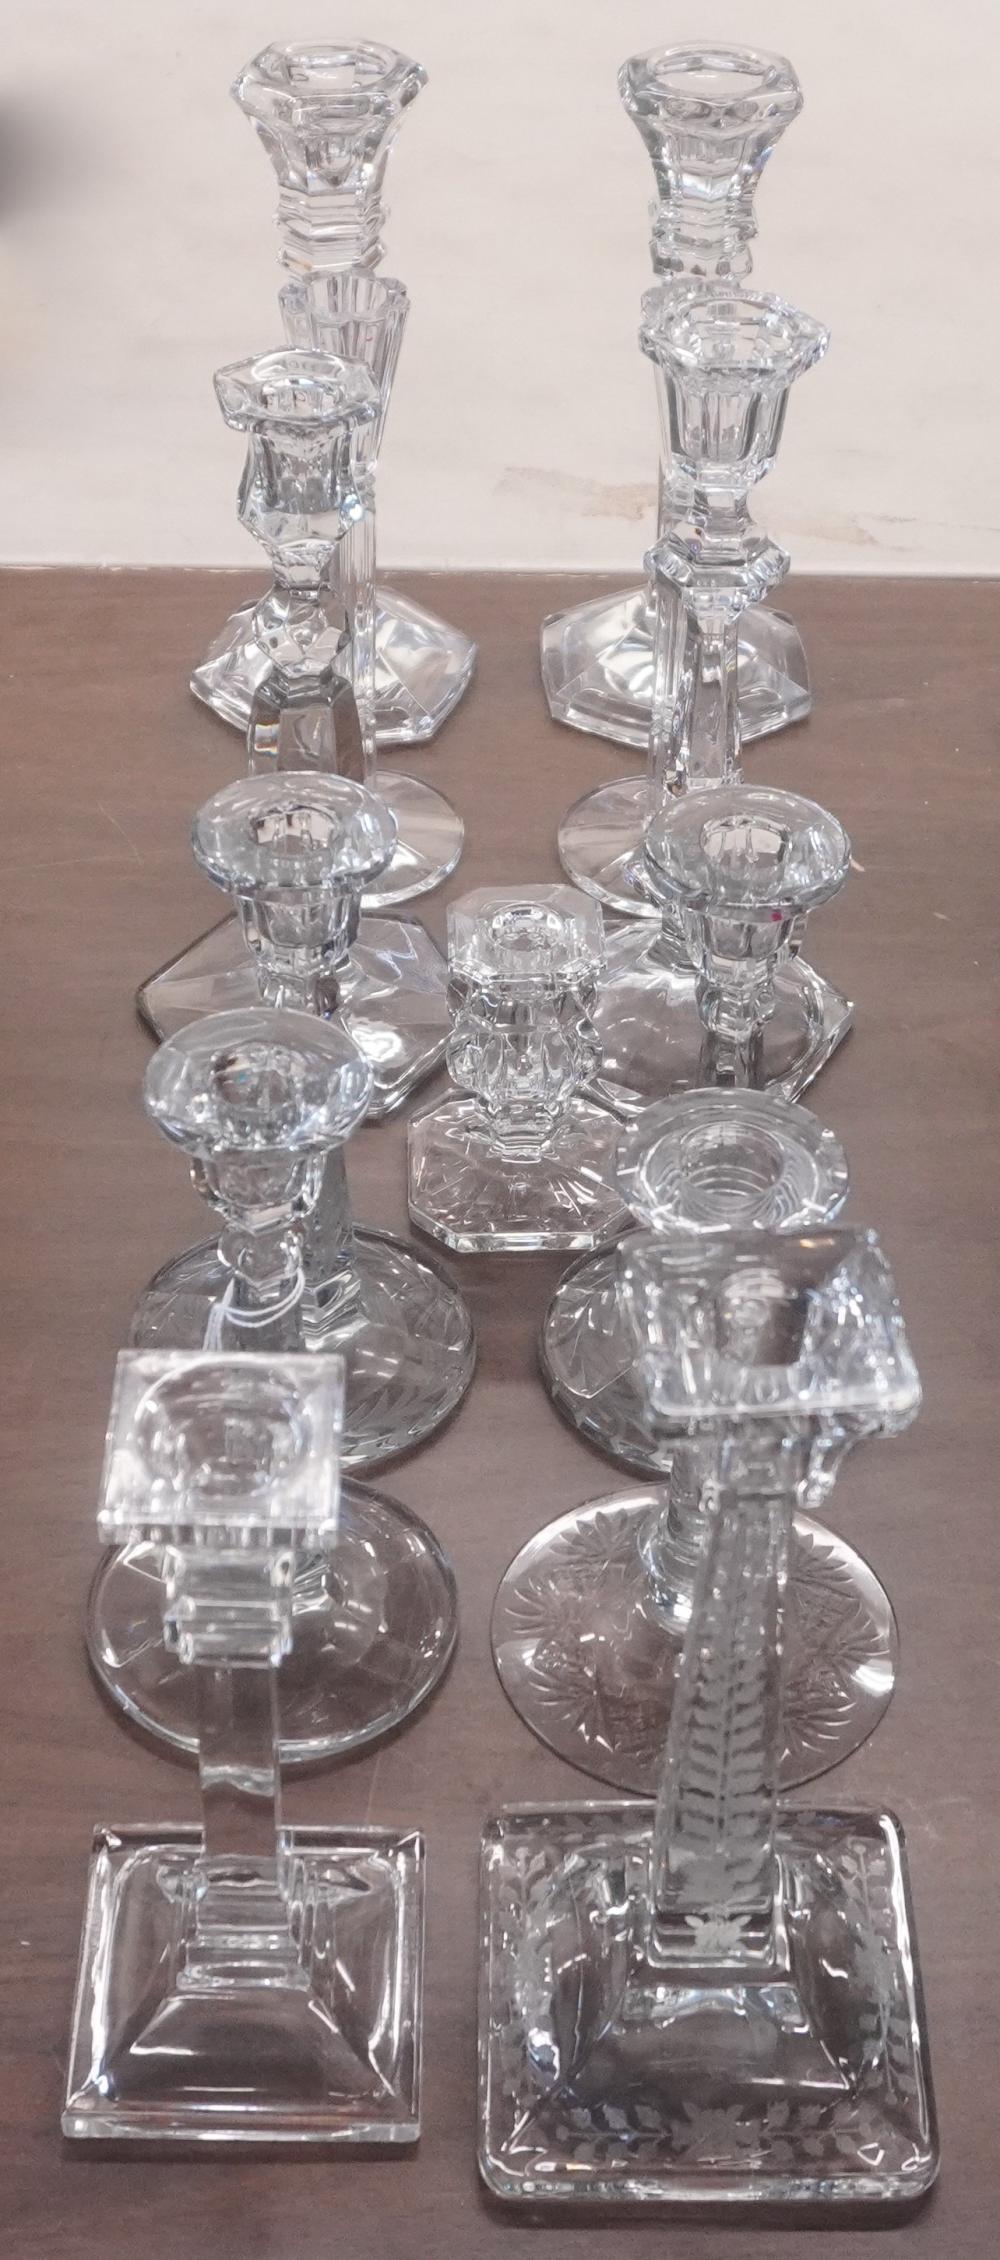 GROUP OF CRYSTAL AND GLASS CANDLESTICKSGroup